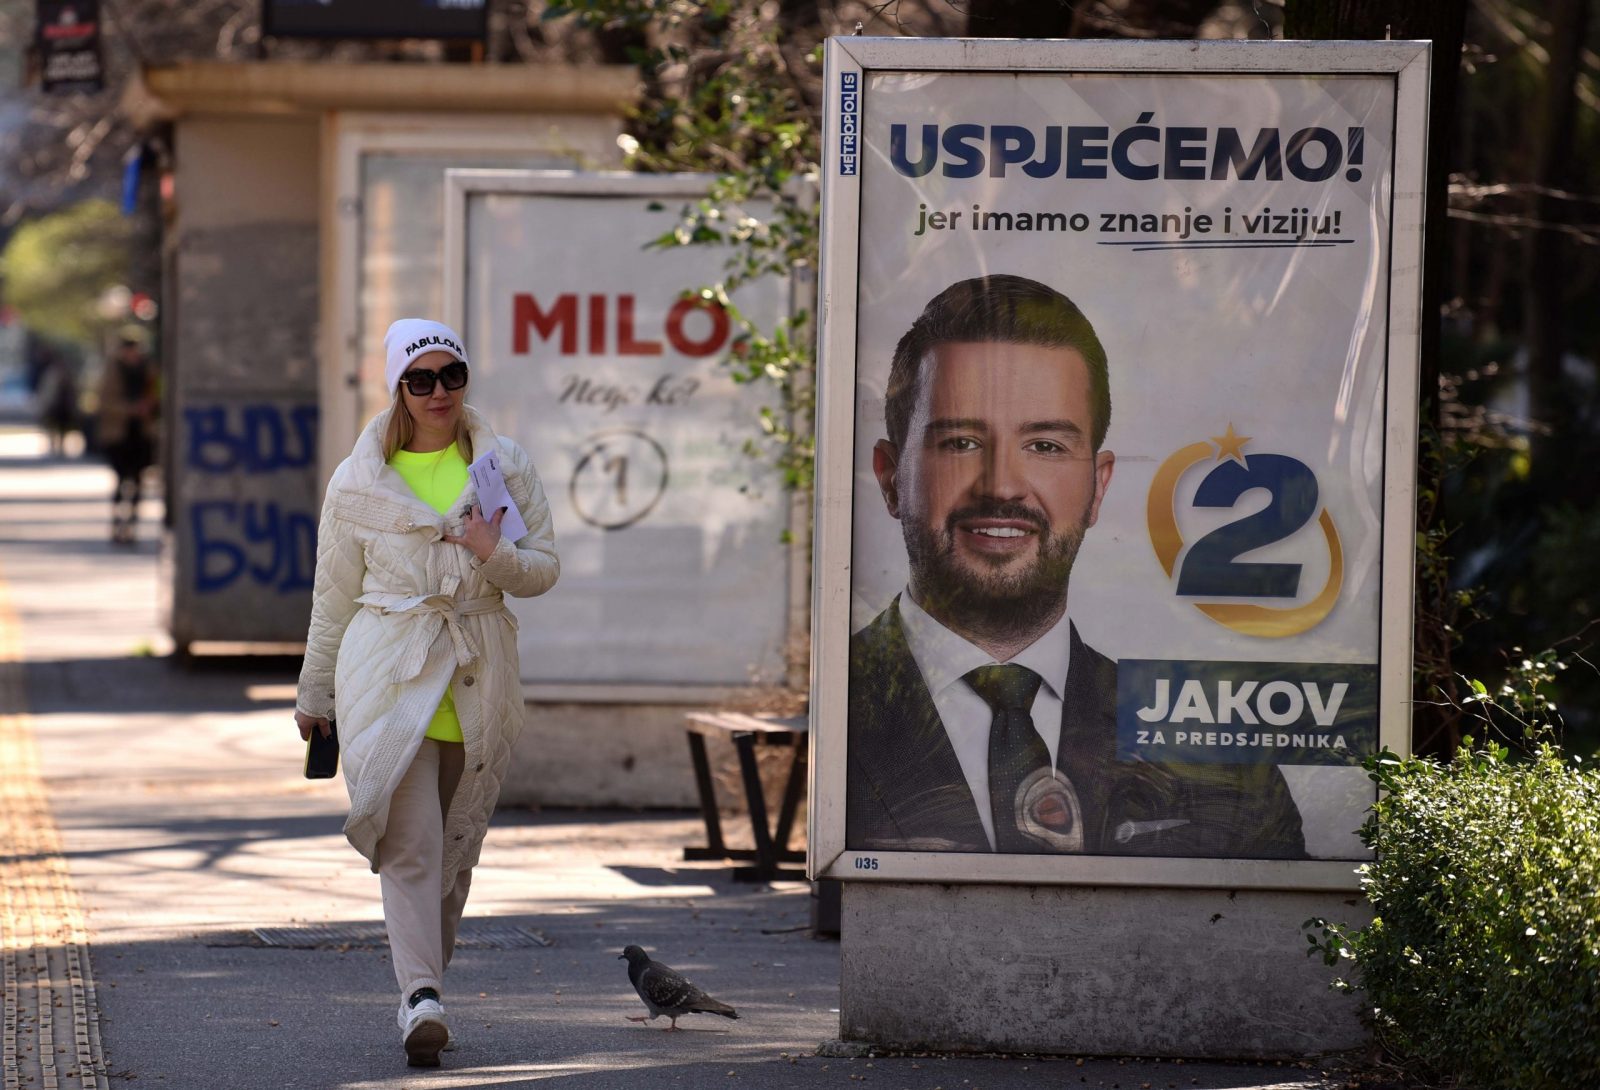 epa10528198 A woman walks past campaign billboards of the Presidential candidates Milo Djukanovic and Jakov Milatovic ahead of the upcoming Presidential elections in Podgorica, Montenegro, 17 March 2023. Presidential elections are due to be held in Montenegro on 19 March 2023.  EPA/BORIS PEJOVIC